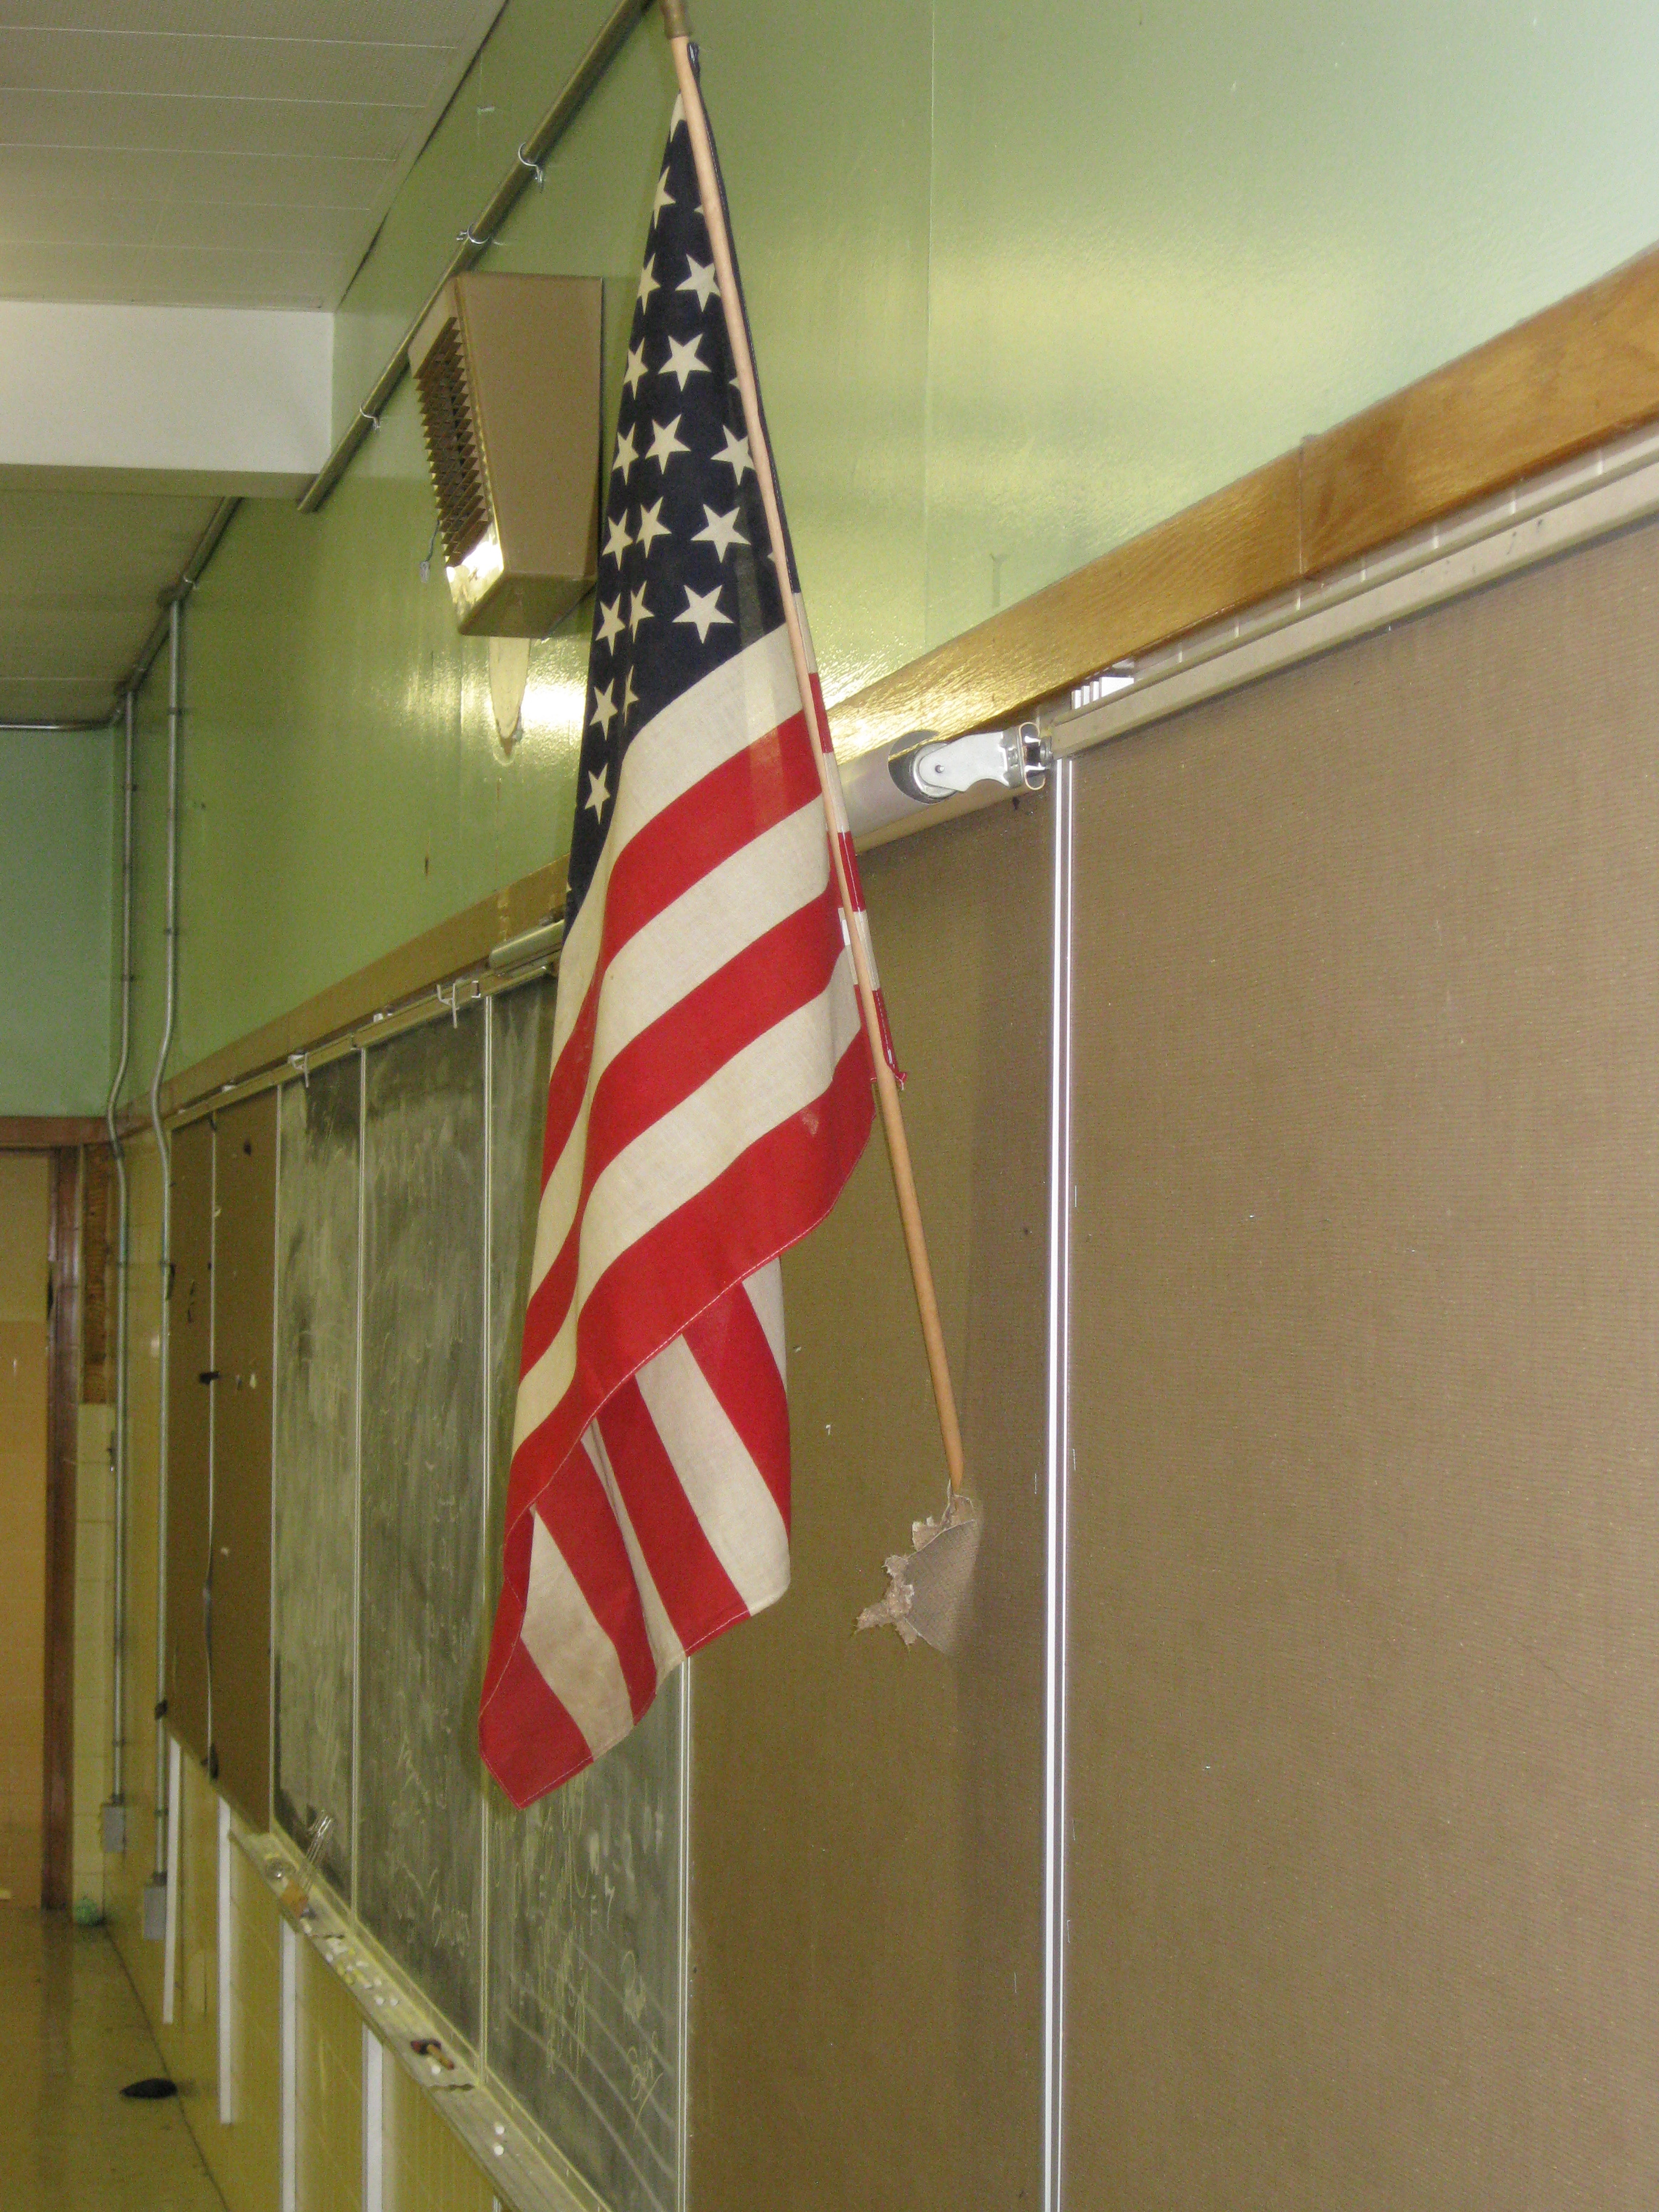 Stars and Stripes still standing. Is it being held up by tape?